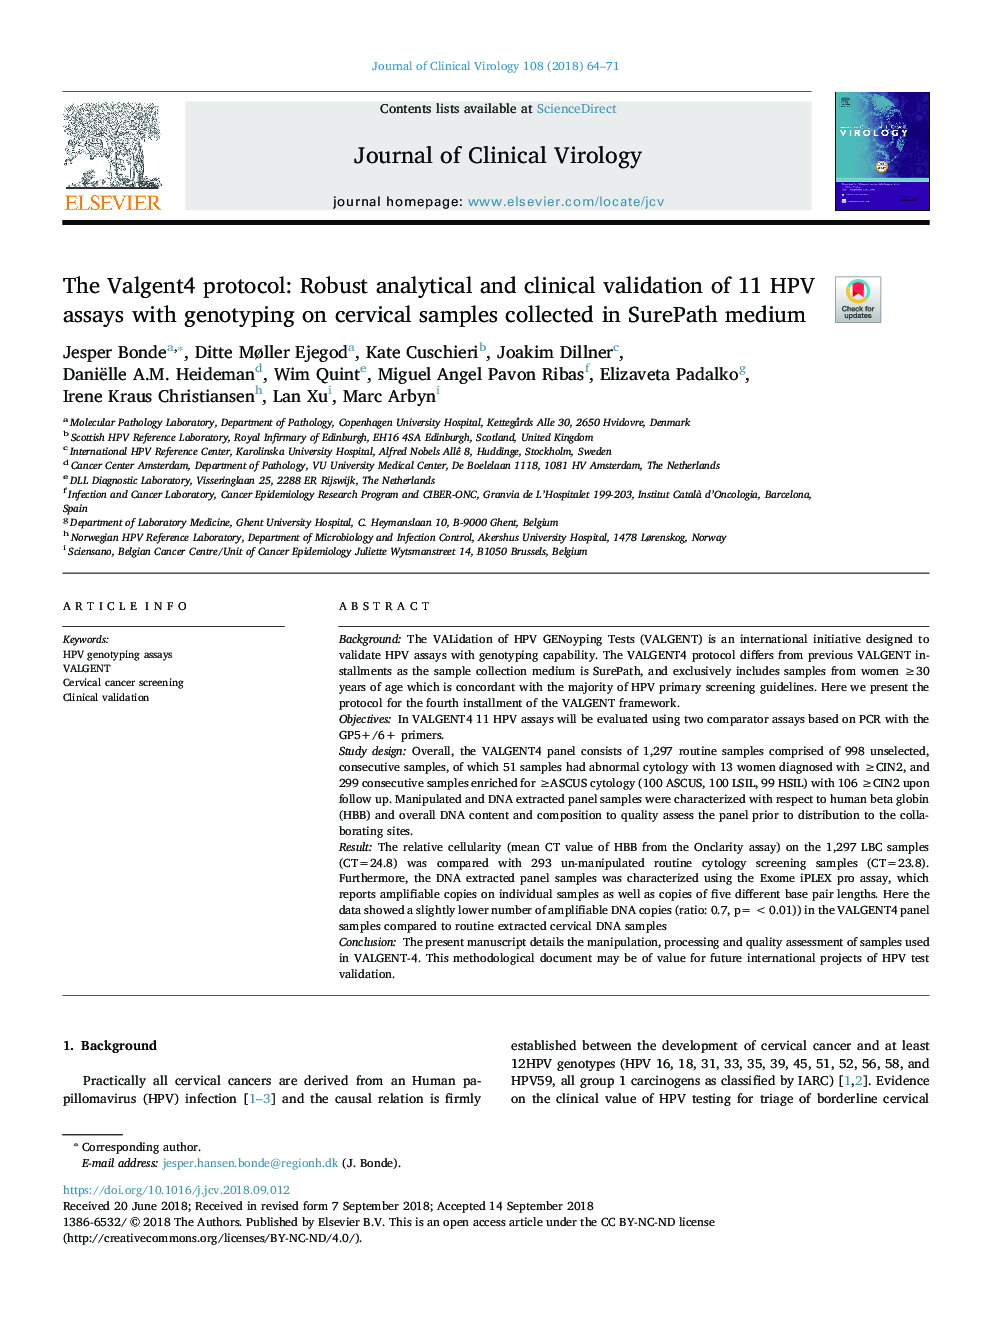 The Valgent4 protocol: Robust analytical and clinical validation of 11 HPV assays with genotyping on cervical samples collected in SurePath medium